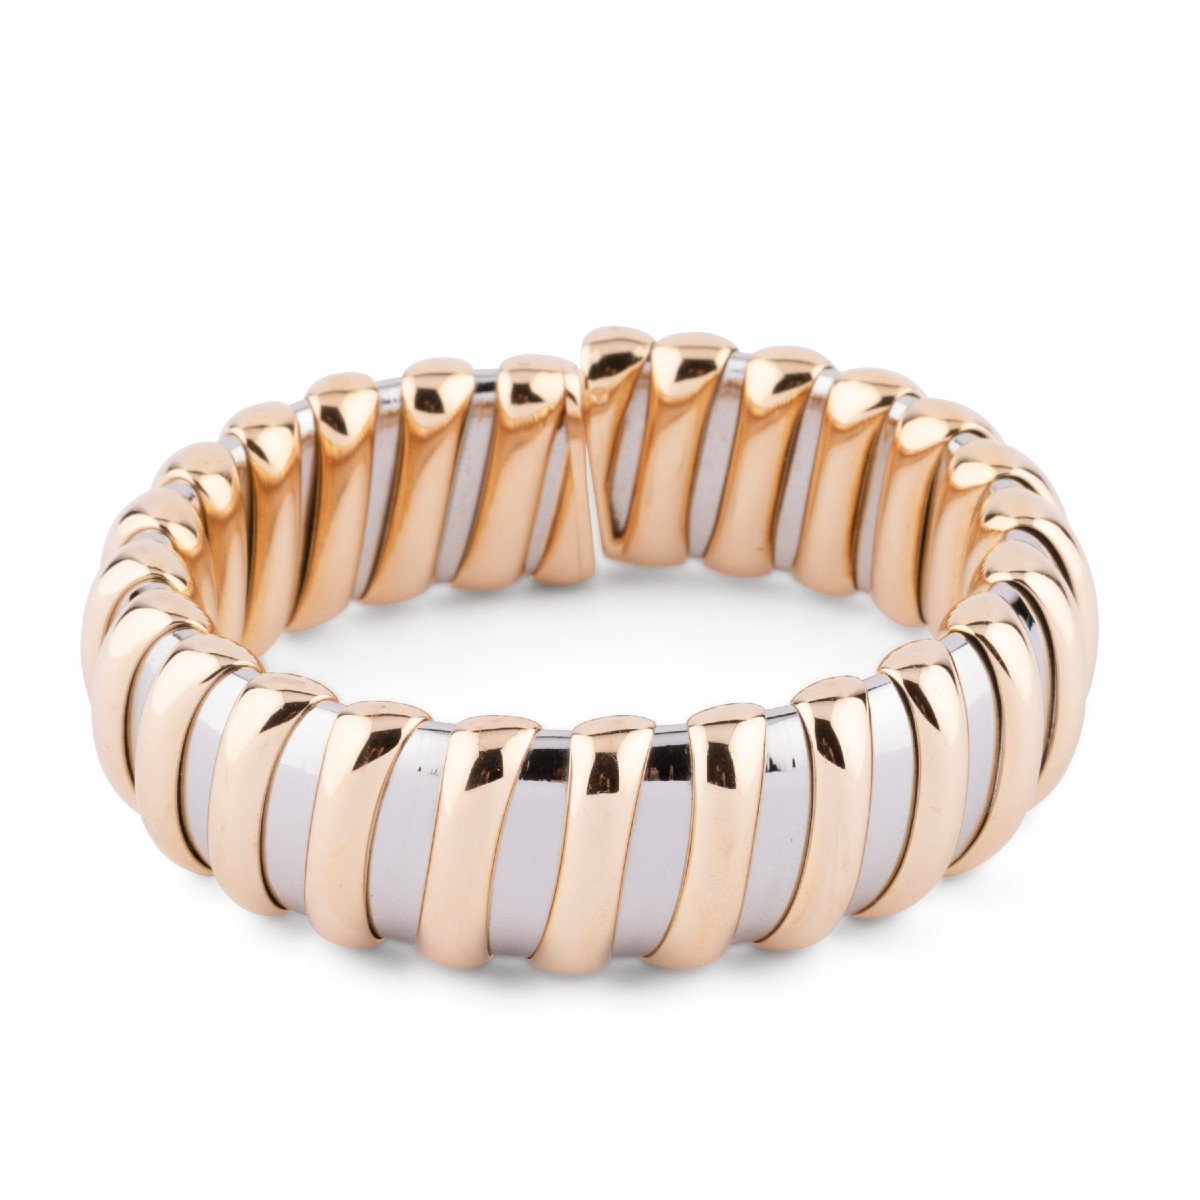 Yellow Gold And Steel Bracelet Signed From Maison Bvlgari